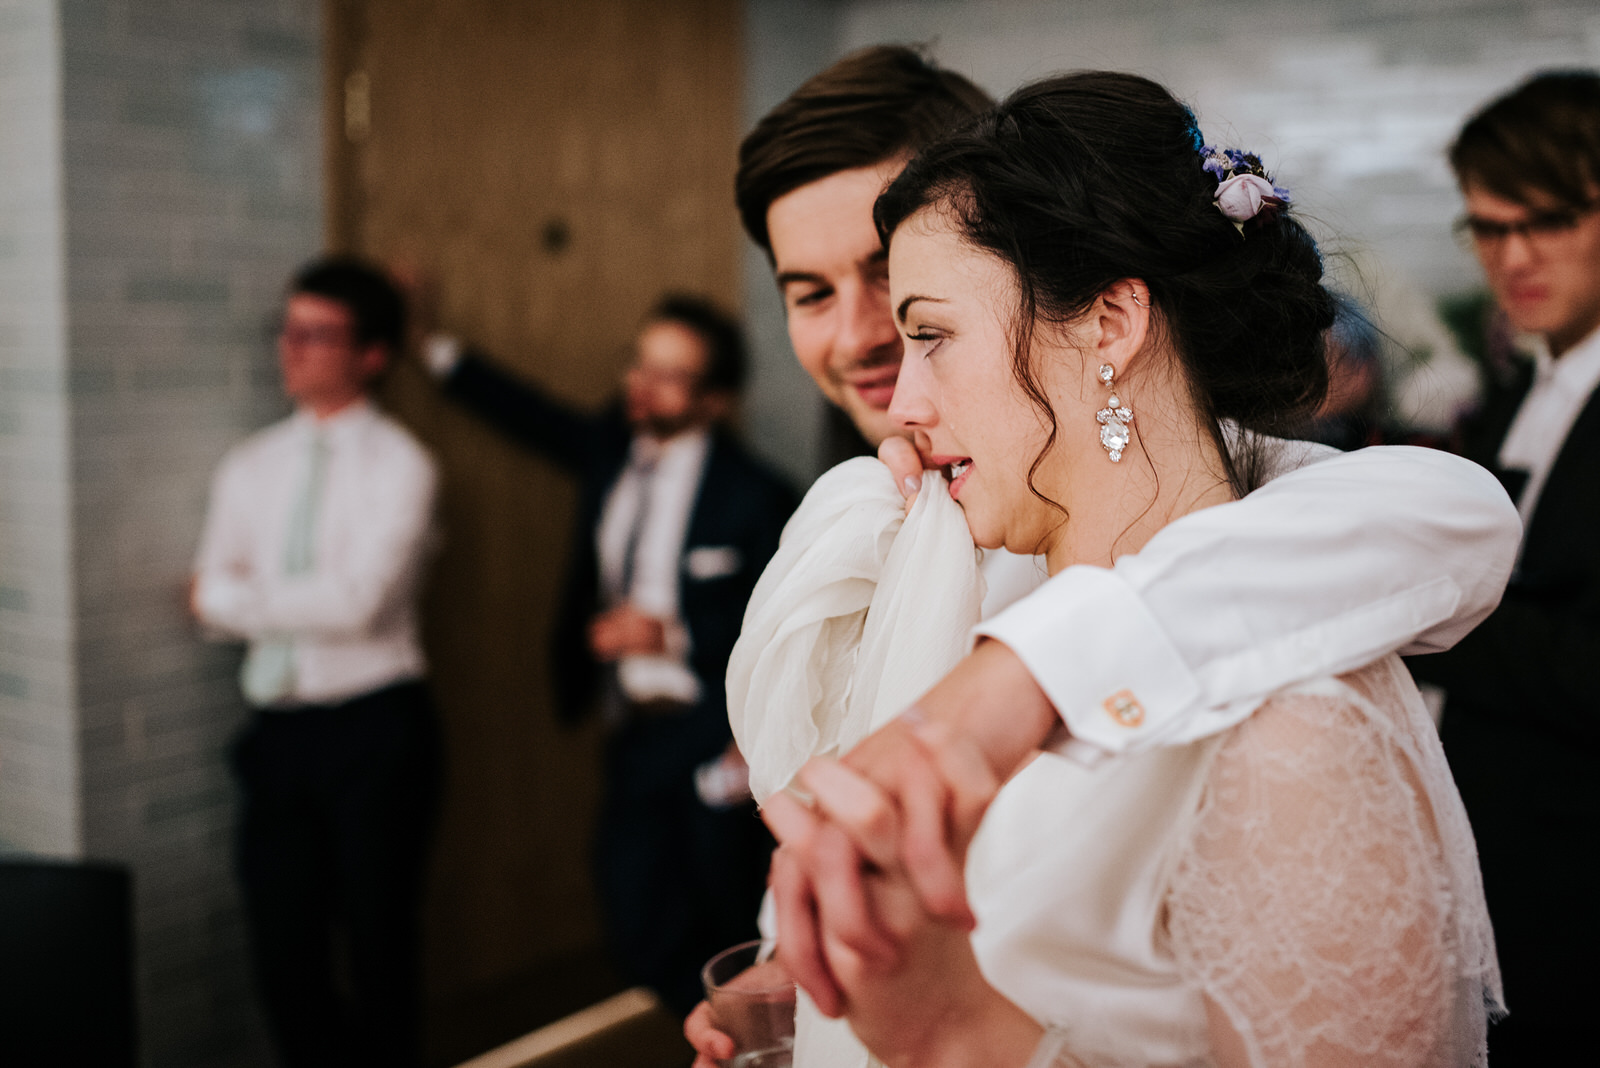 Bride reacts to speeches by tearing up as groom embraces her